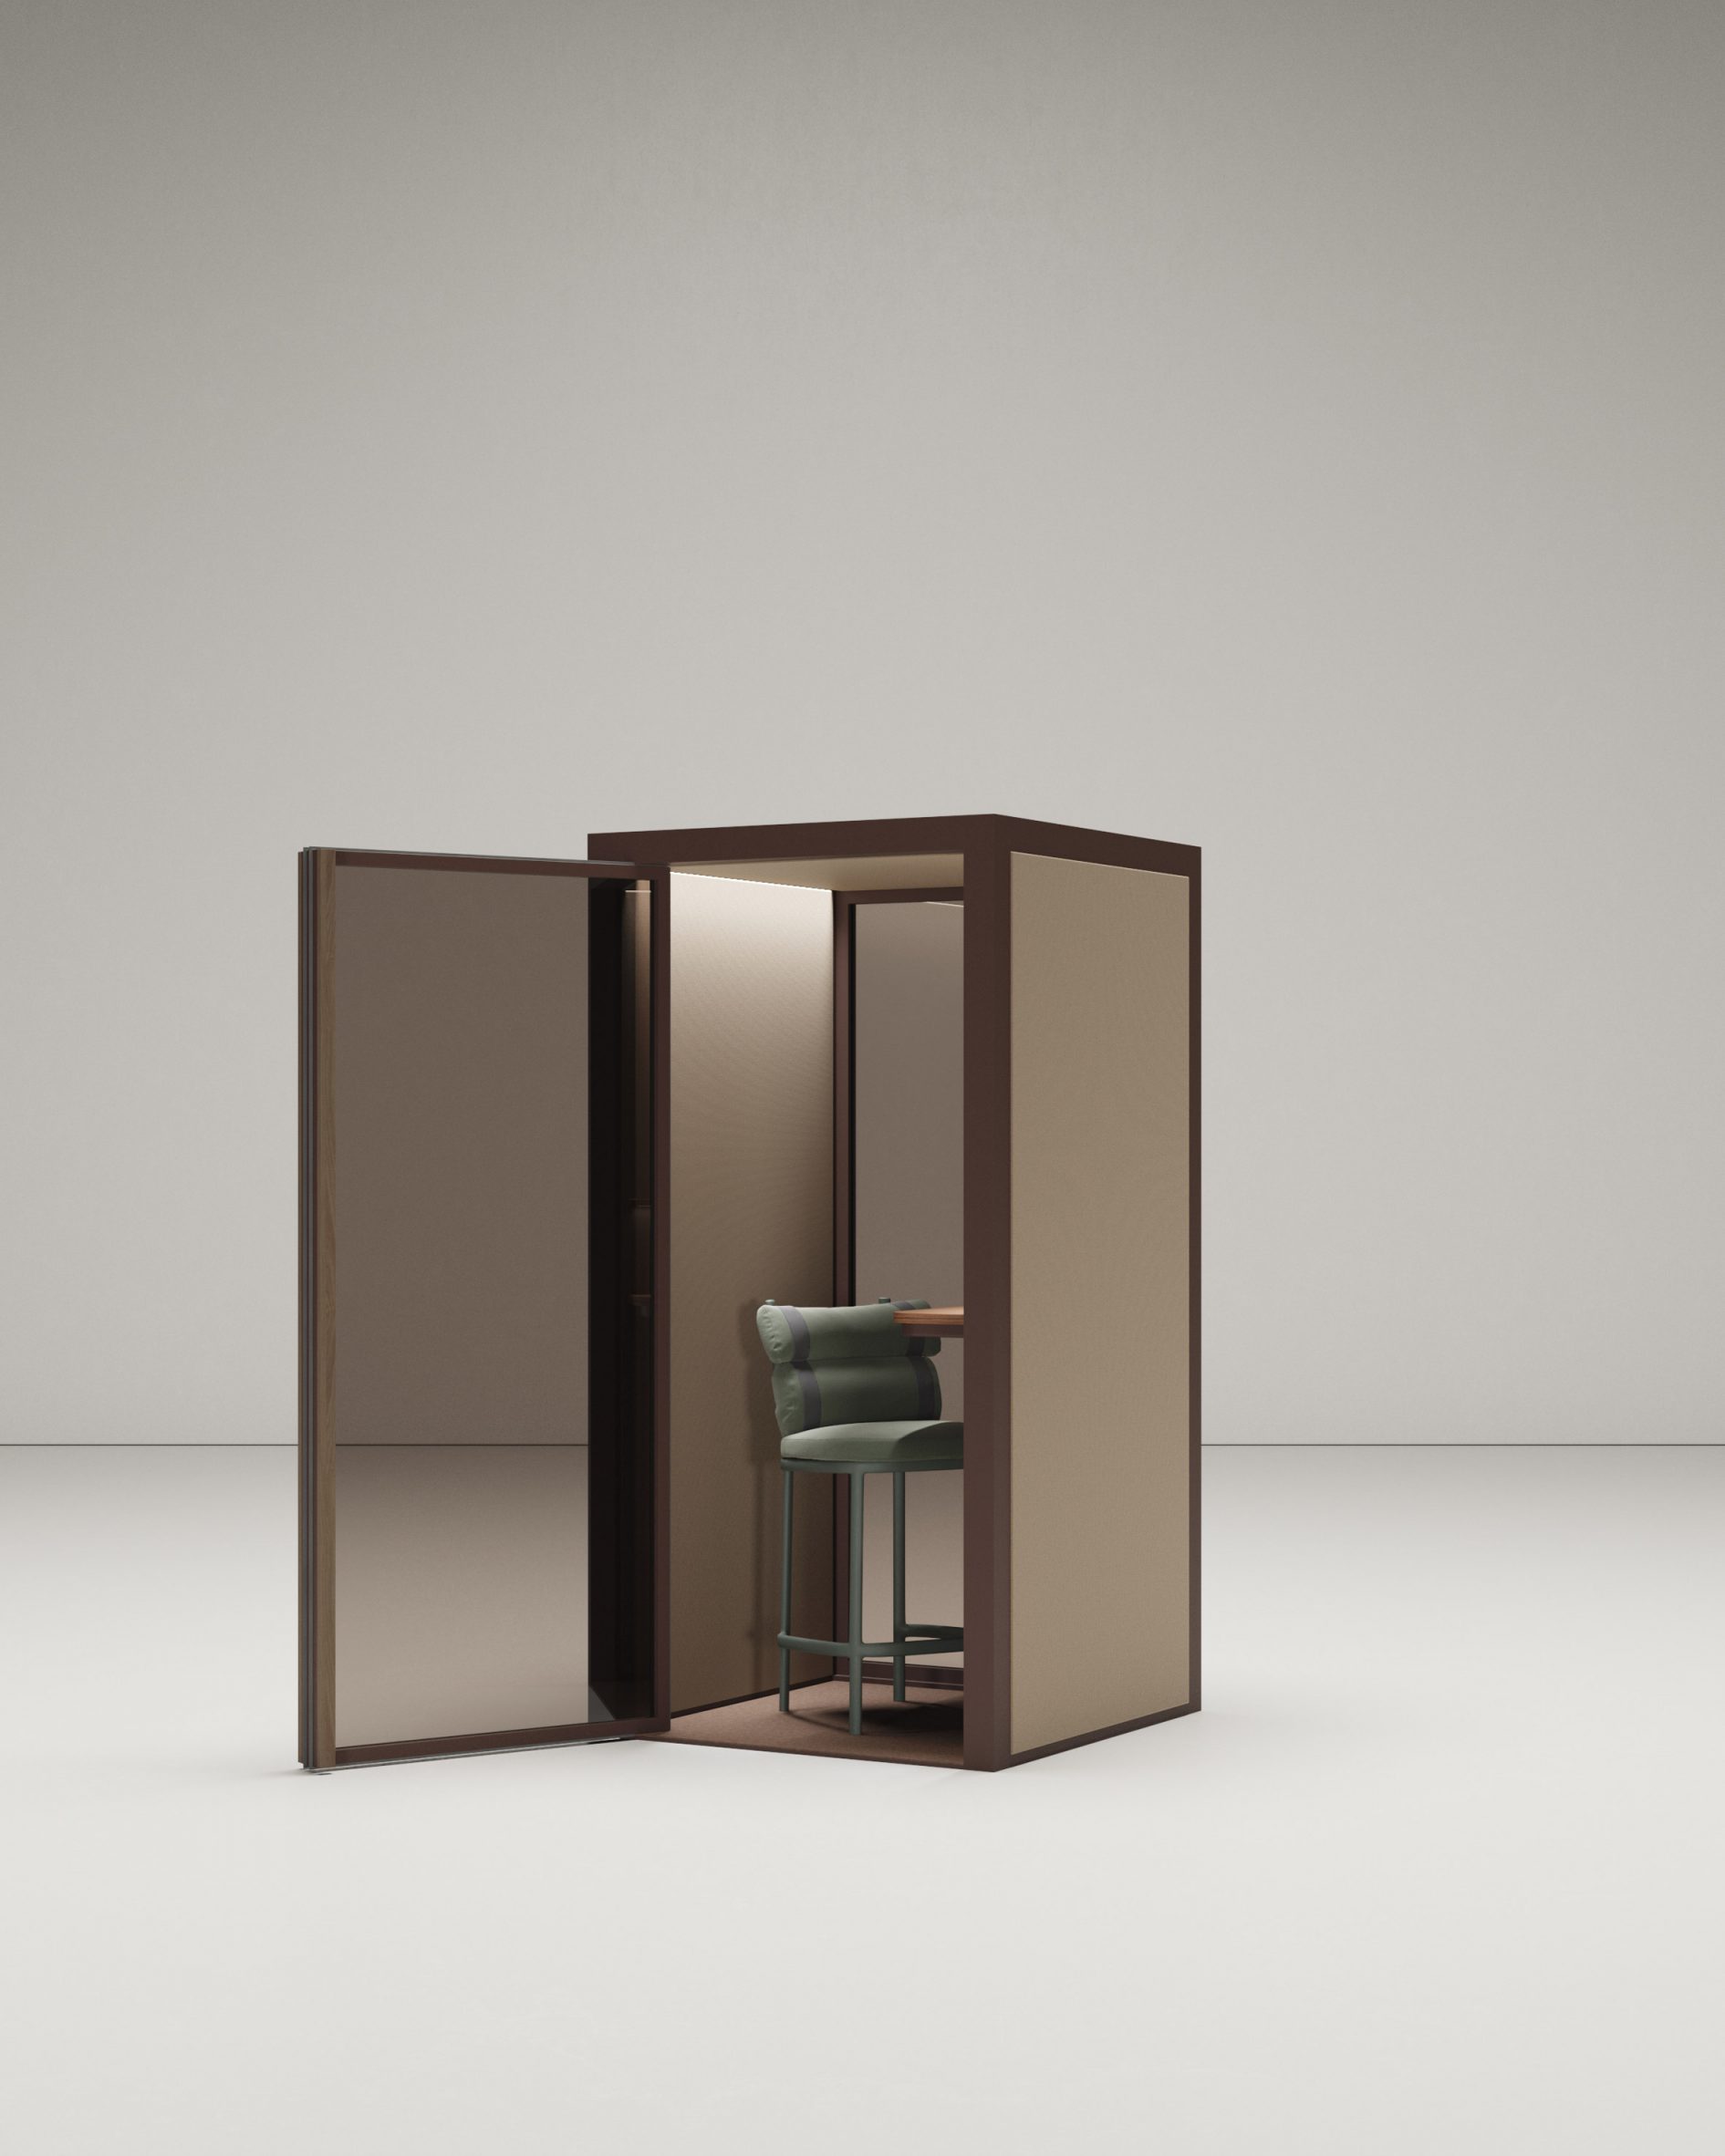 Phonebooth meeting pods designed by furniture brand Kettal